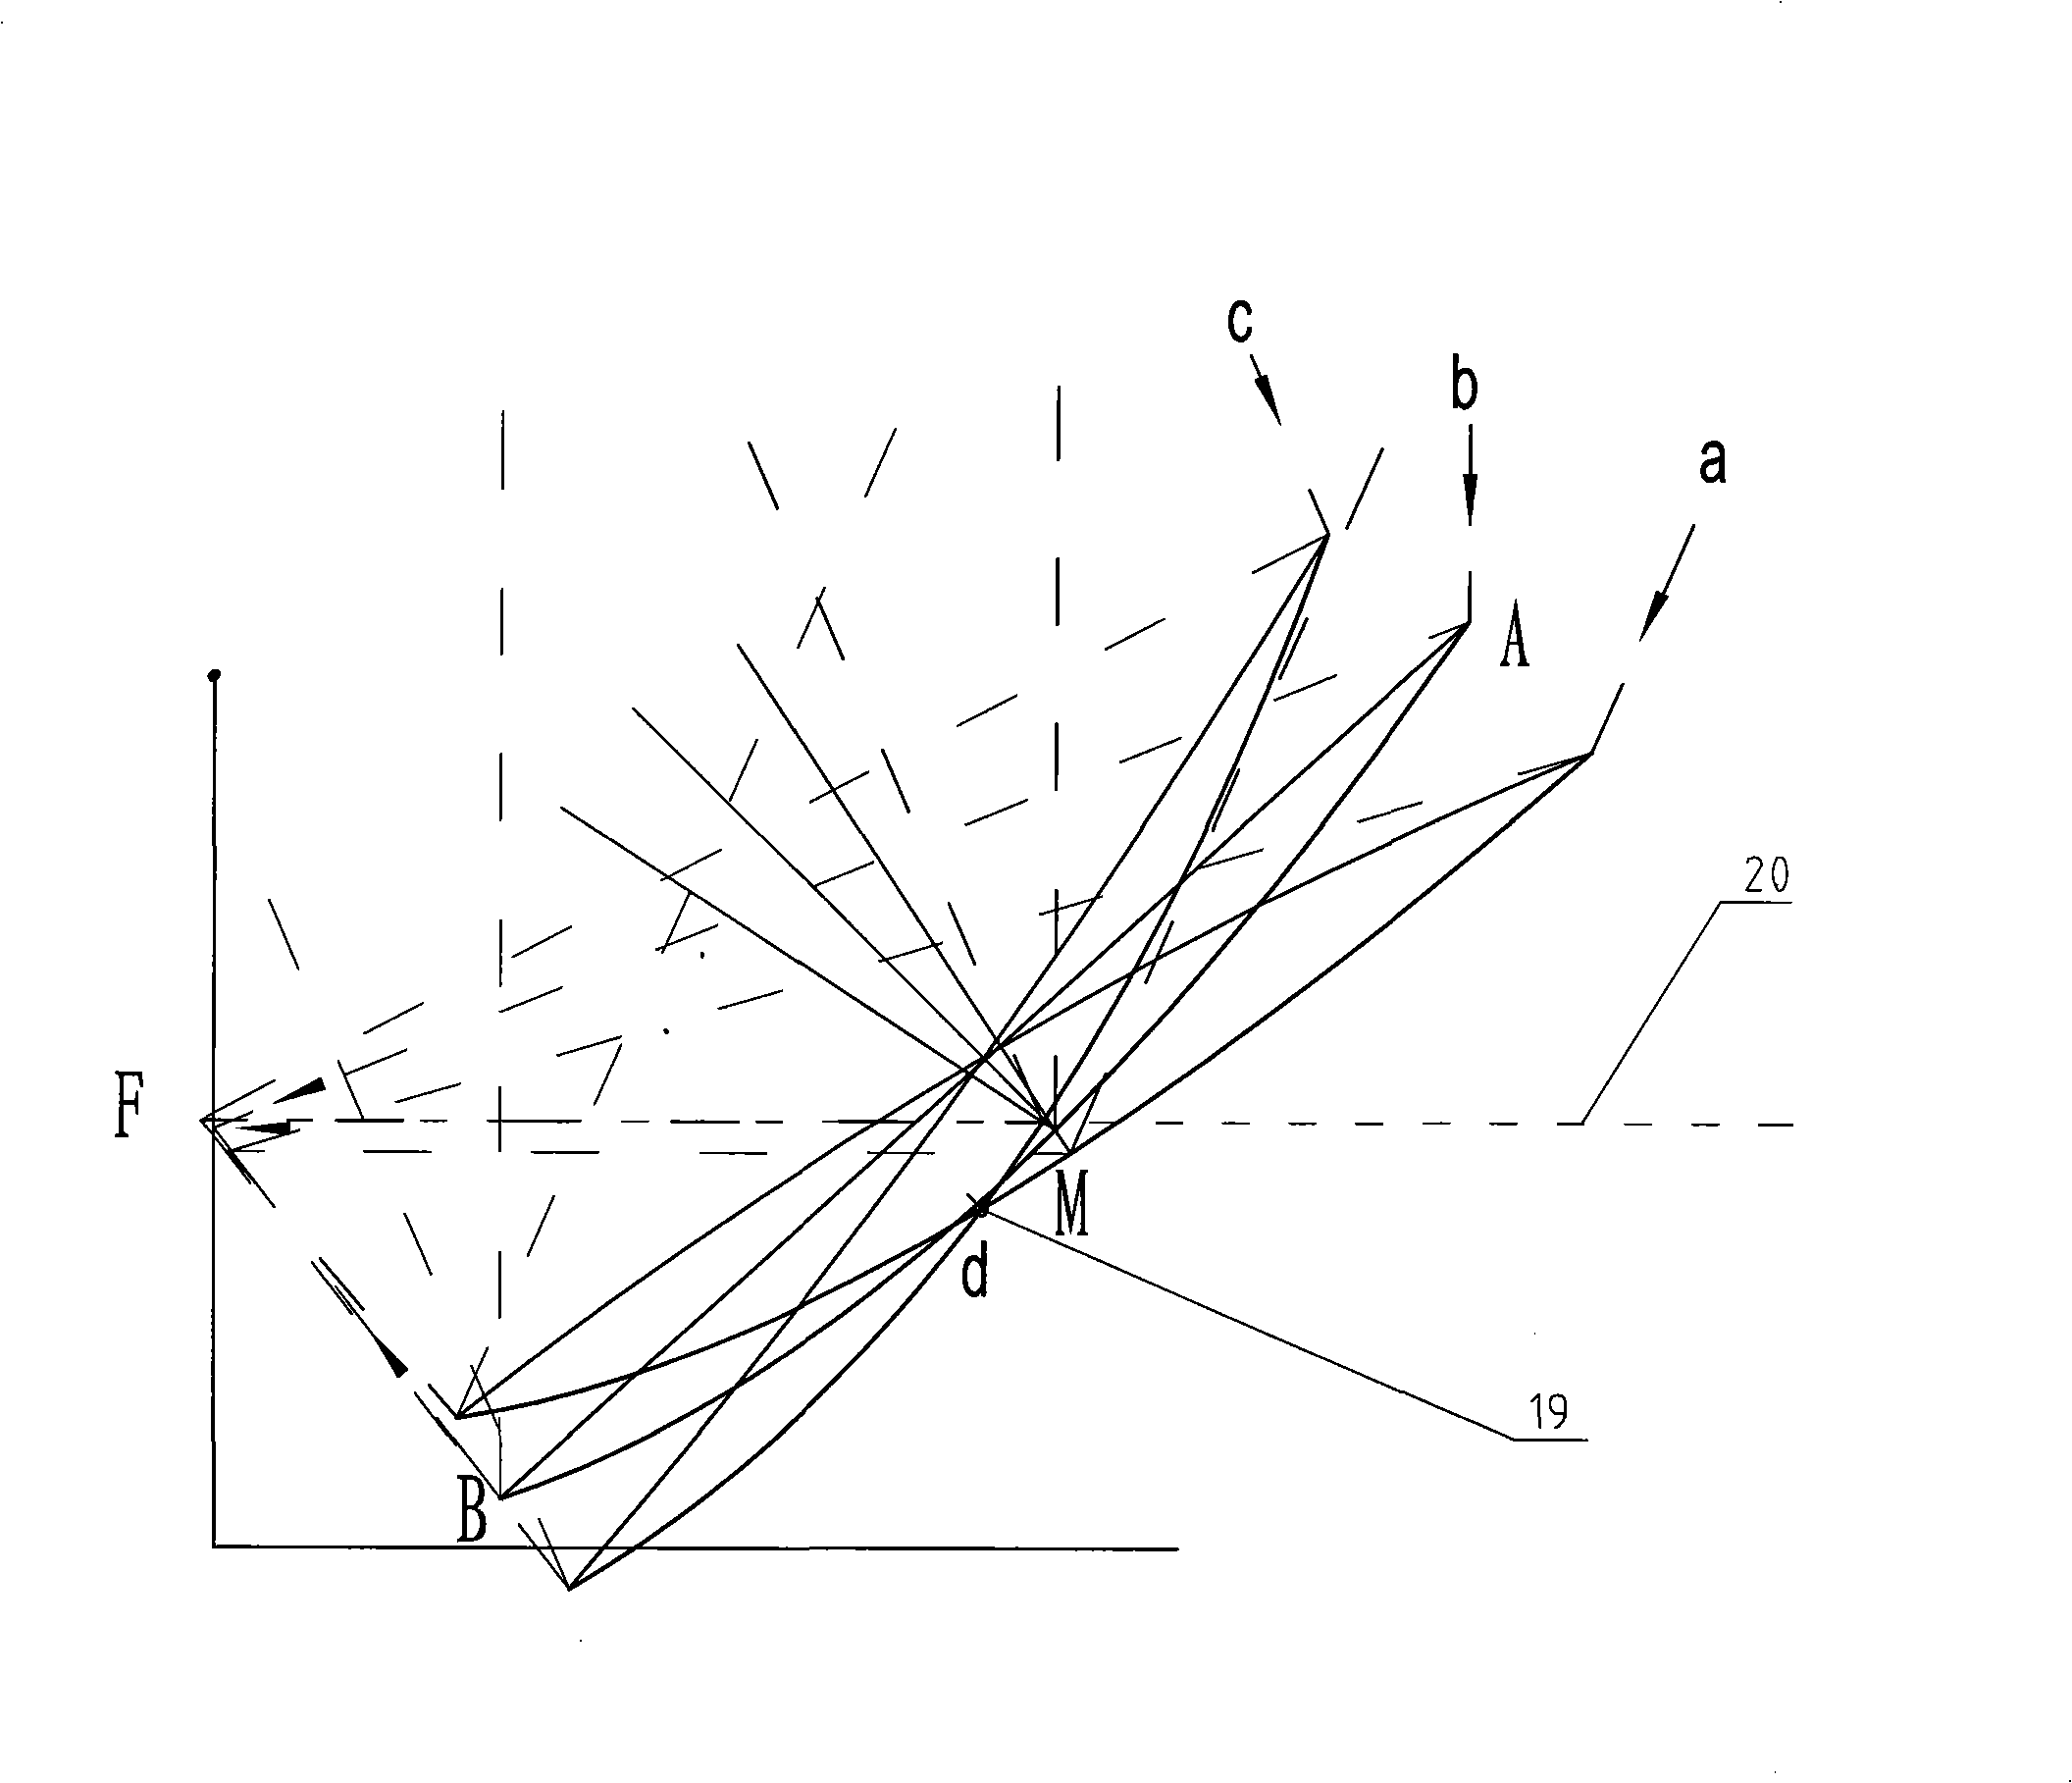 Solar focus-fixing receiving arrangement for synchronously adjusting curvature and elevation angle